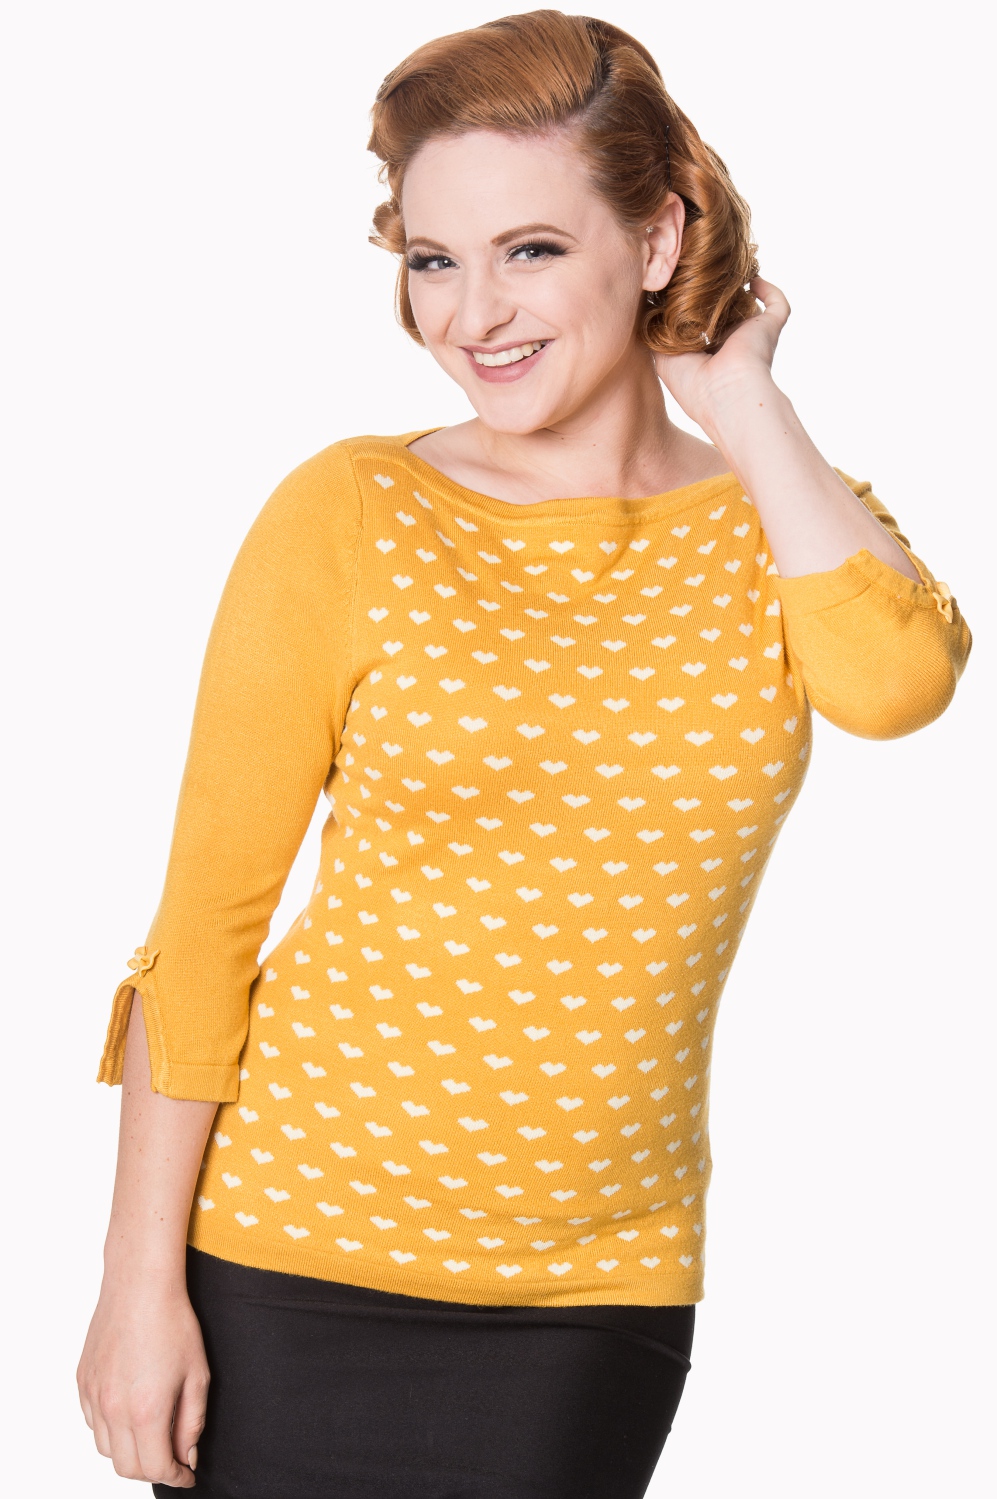 Banned Retro 60s Charming Heart Knit Mustard Sweater